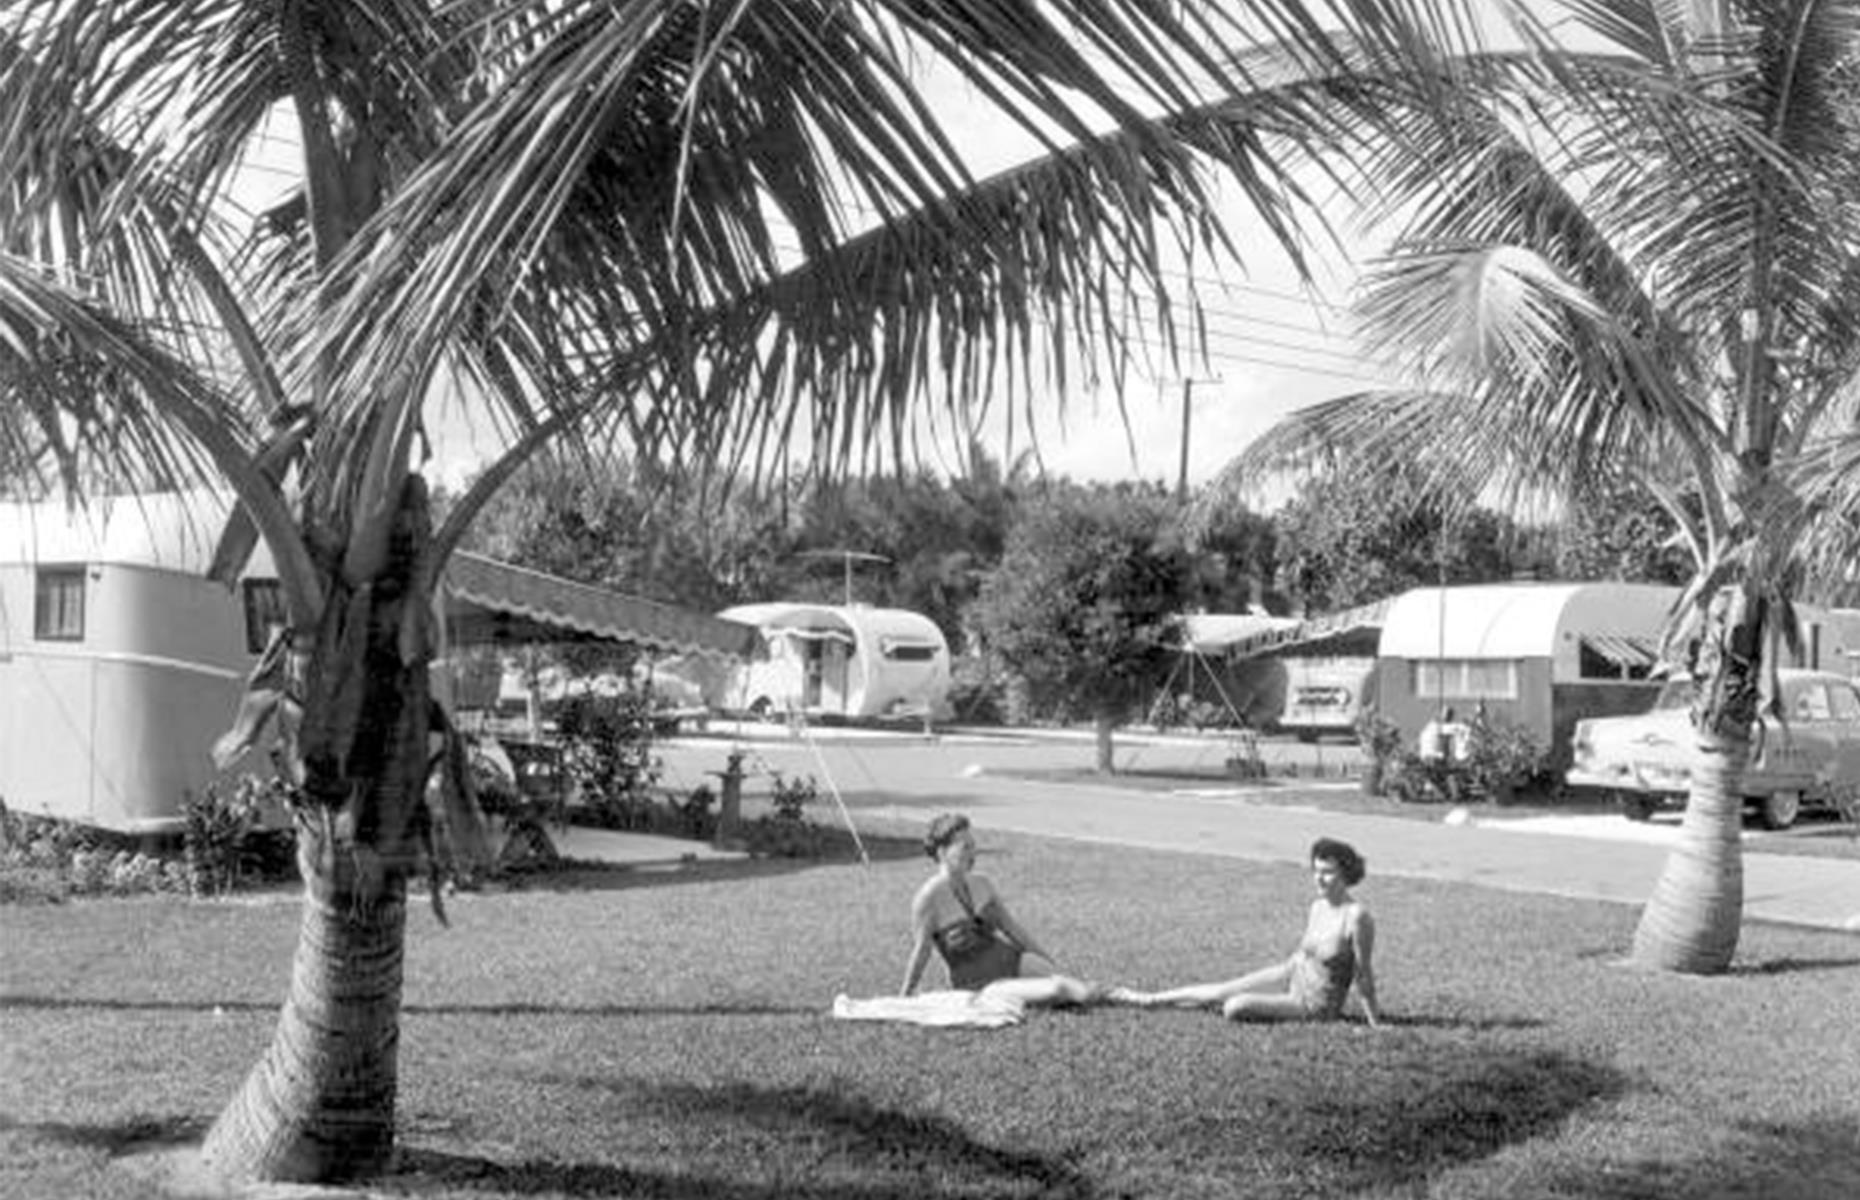 <p>As road-tripping with a motorhome continued to gain in popularity, RV parks such as this one in Hollywood Beach became more and more commonplace across the States. Here two young women laze on the site's pristine lawn in 1953. </p>  <p><strong><a href="https://www.loveexploring.com/galleries/77699/rv-heaven-the-best-place-to-stay-in-every-state-with-your-motorhome?page=1">Find the best RV park in every state here</a></strong></p>